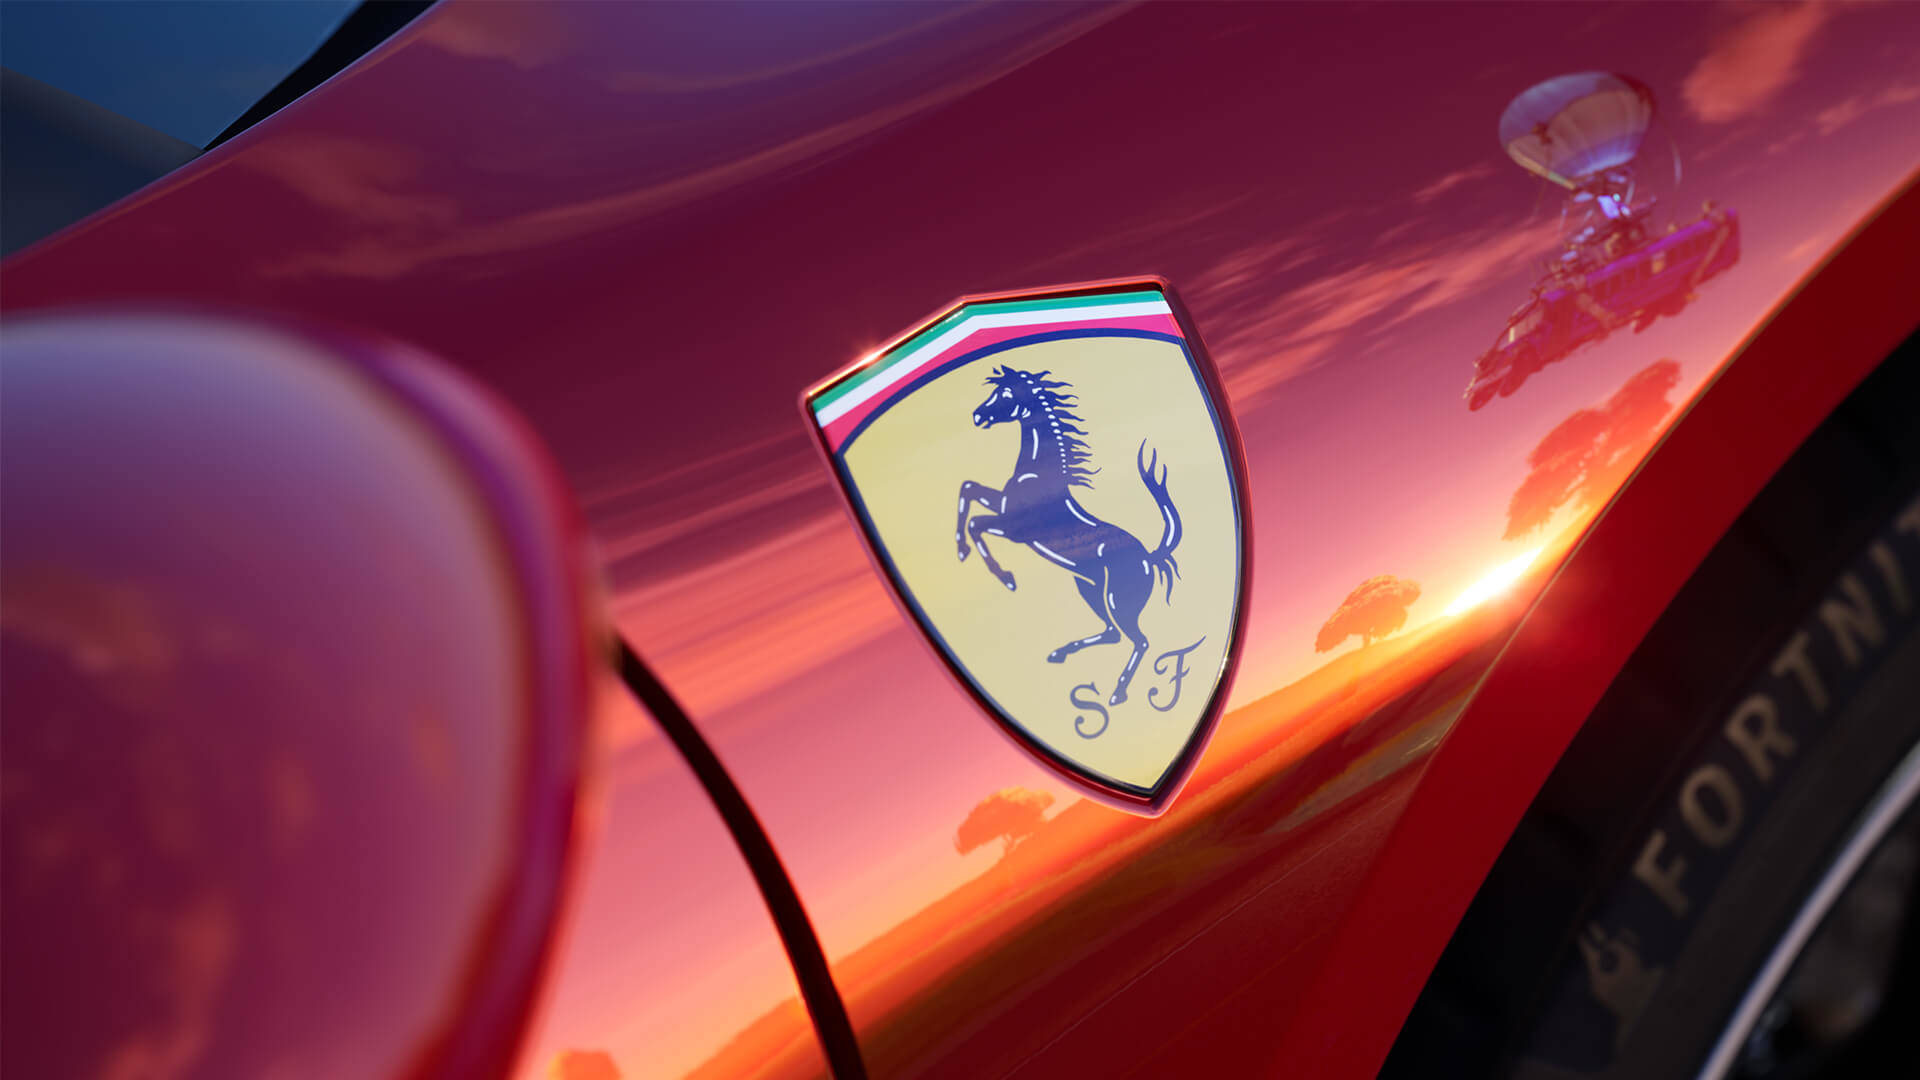 "Experience the thrill of a Ferrari on the open road." Wallpaper